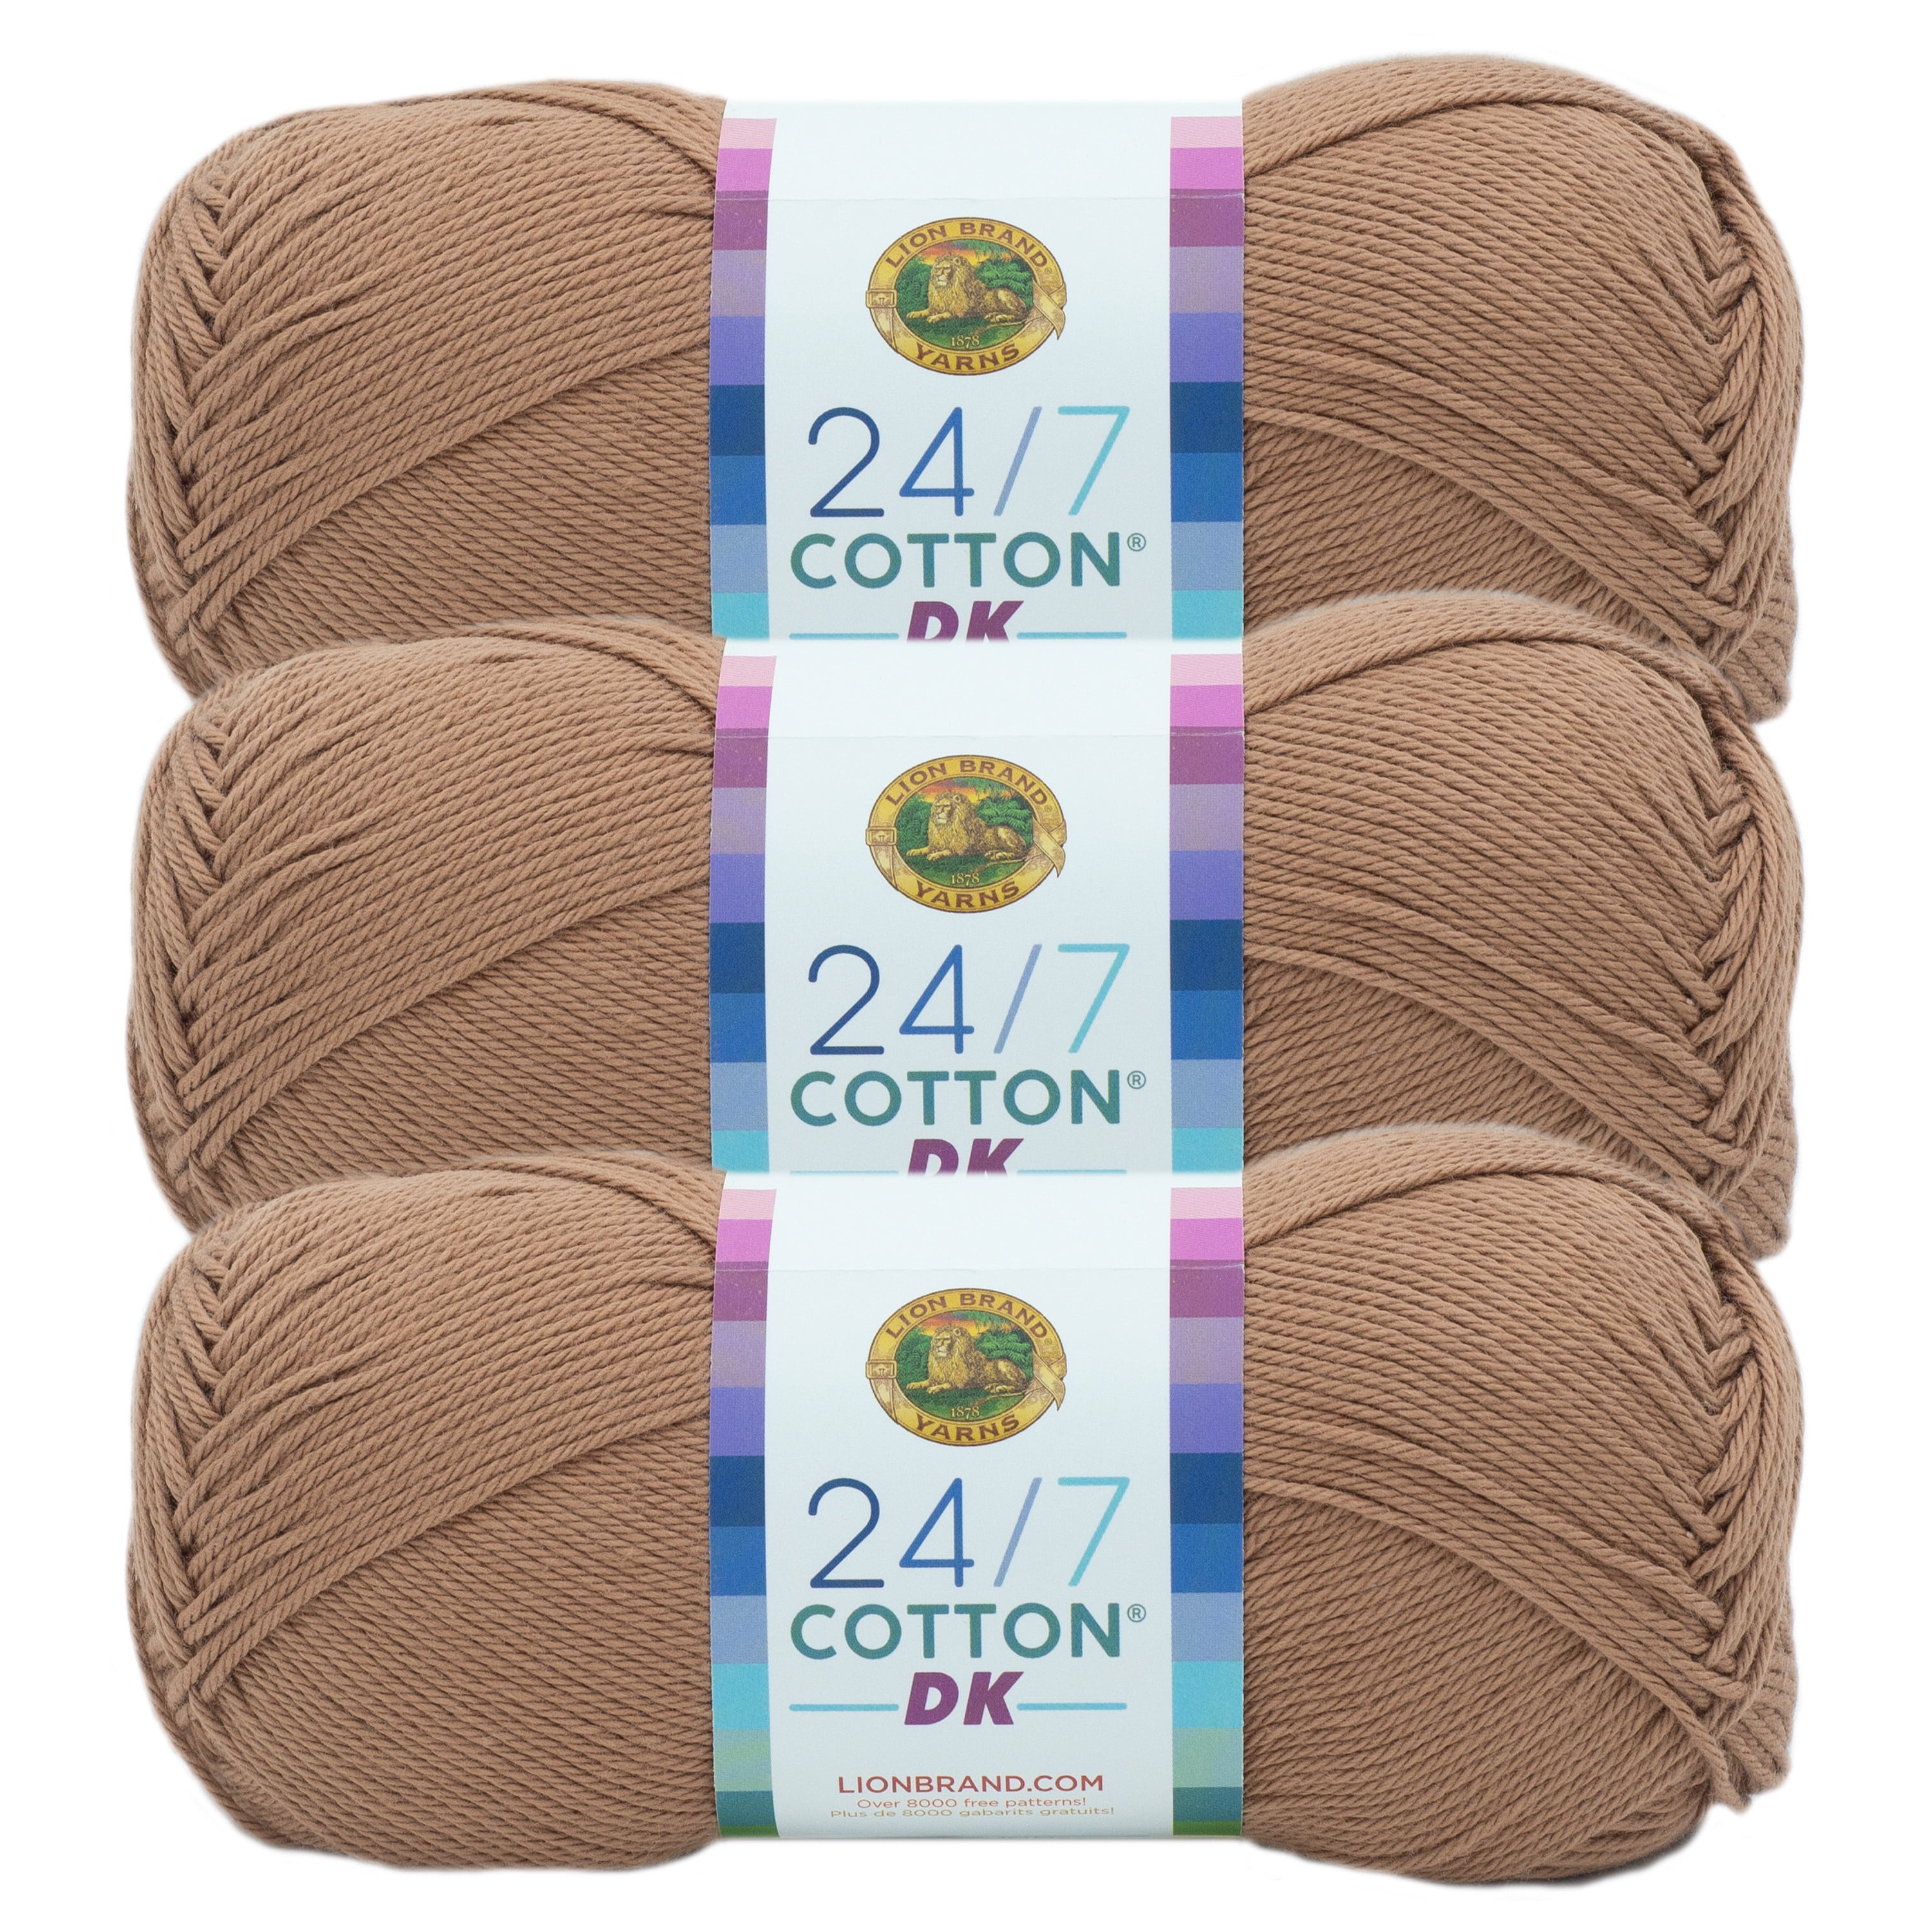 Yarn Review – Lion Brand 24/7 Cotton